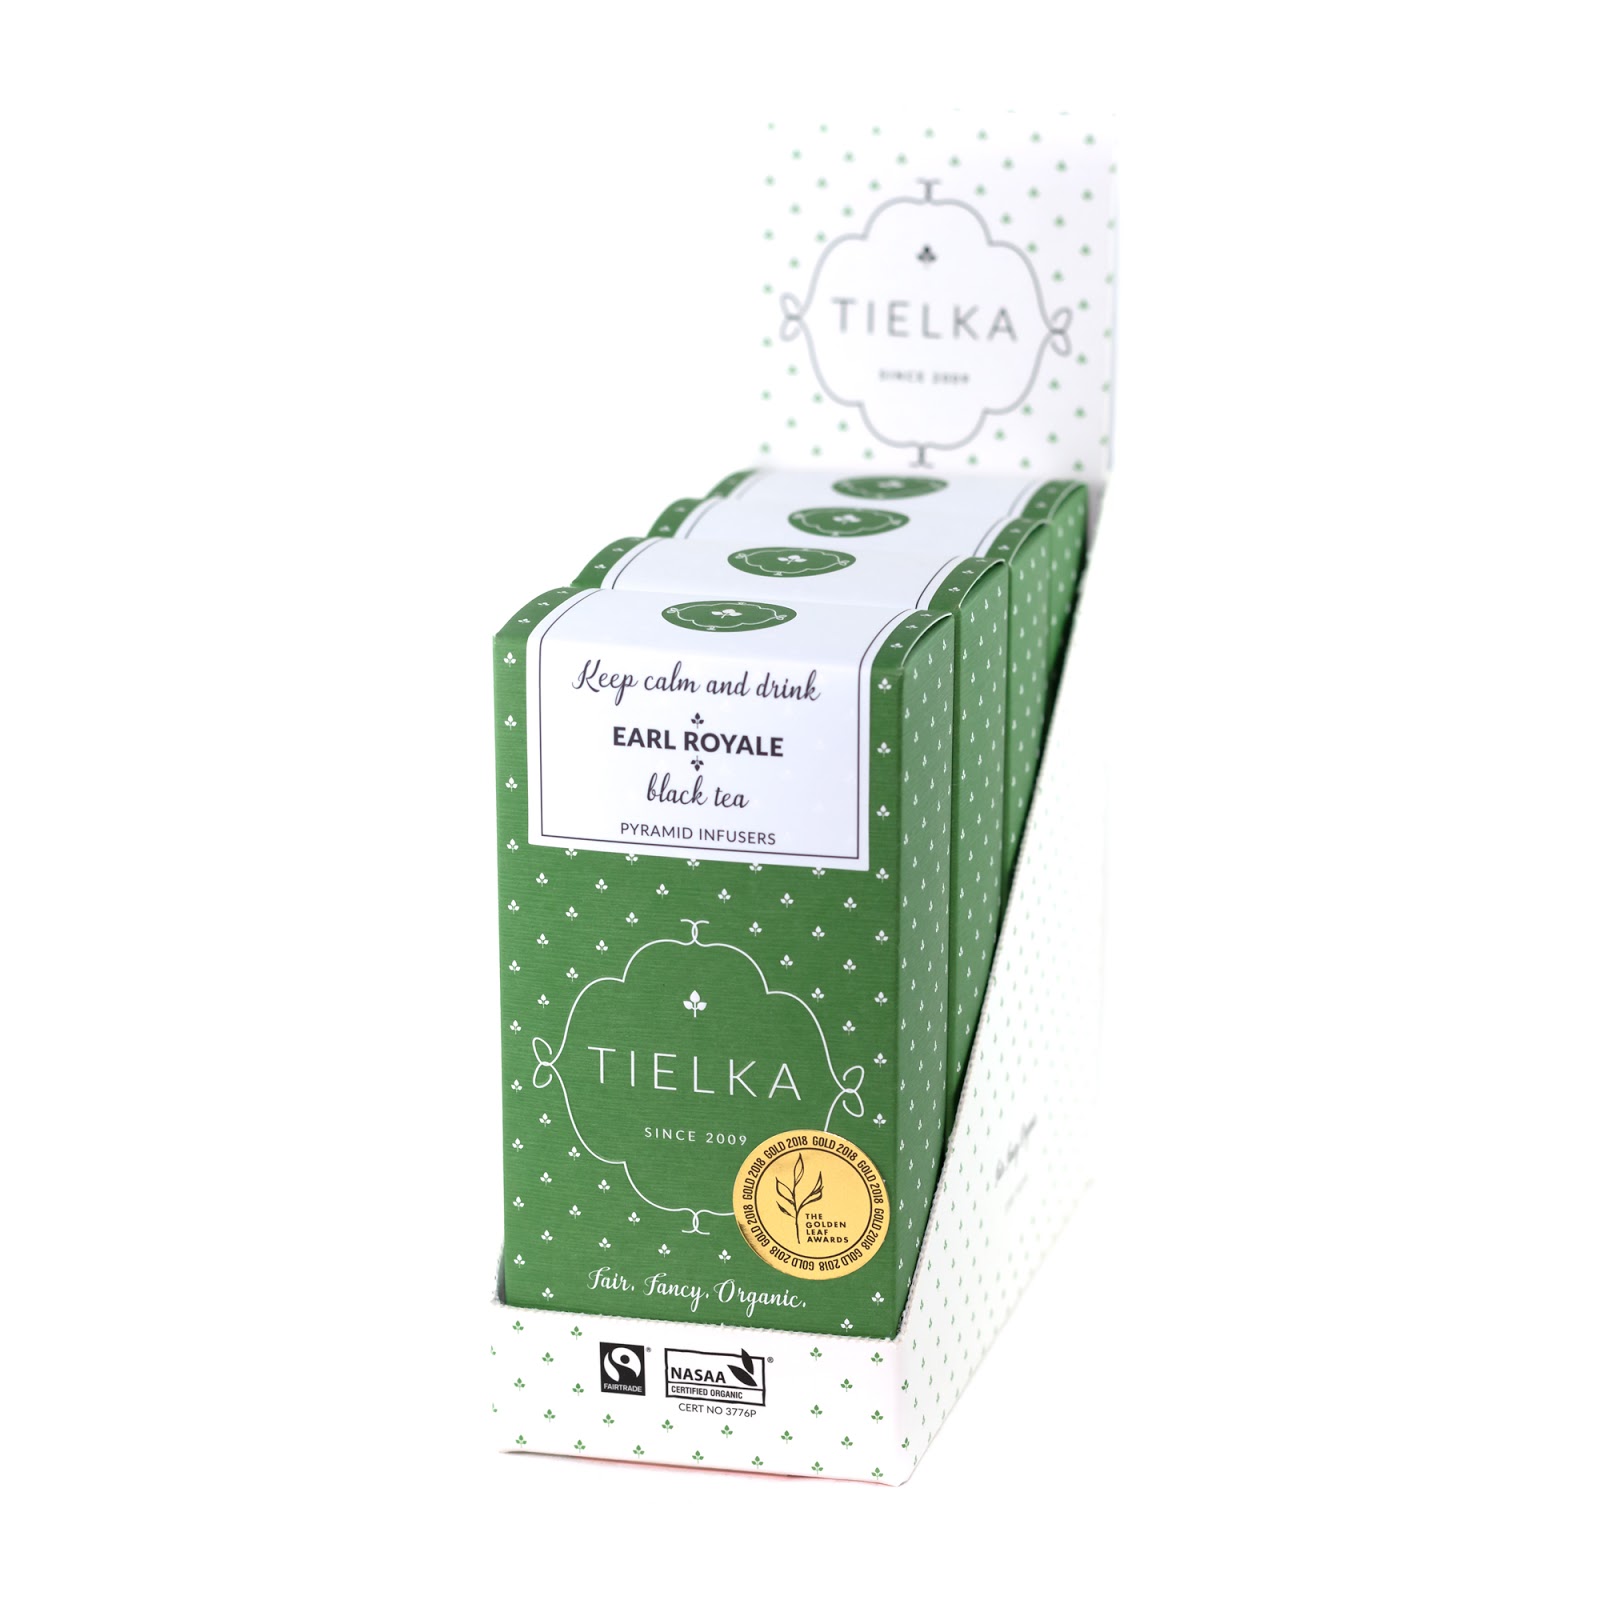 on-becoming-australia-s-first-fairtrade-oganic-loose-leaf-tea-collection